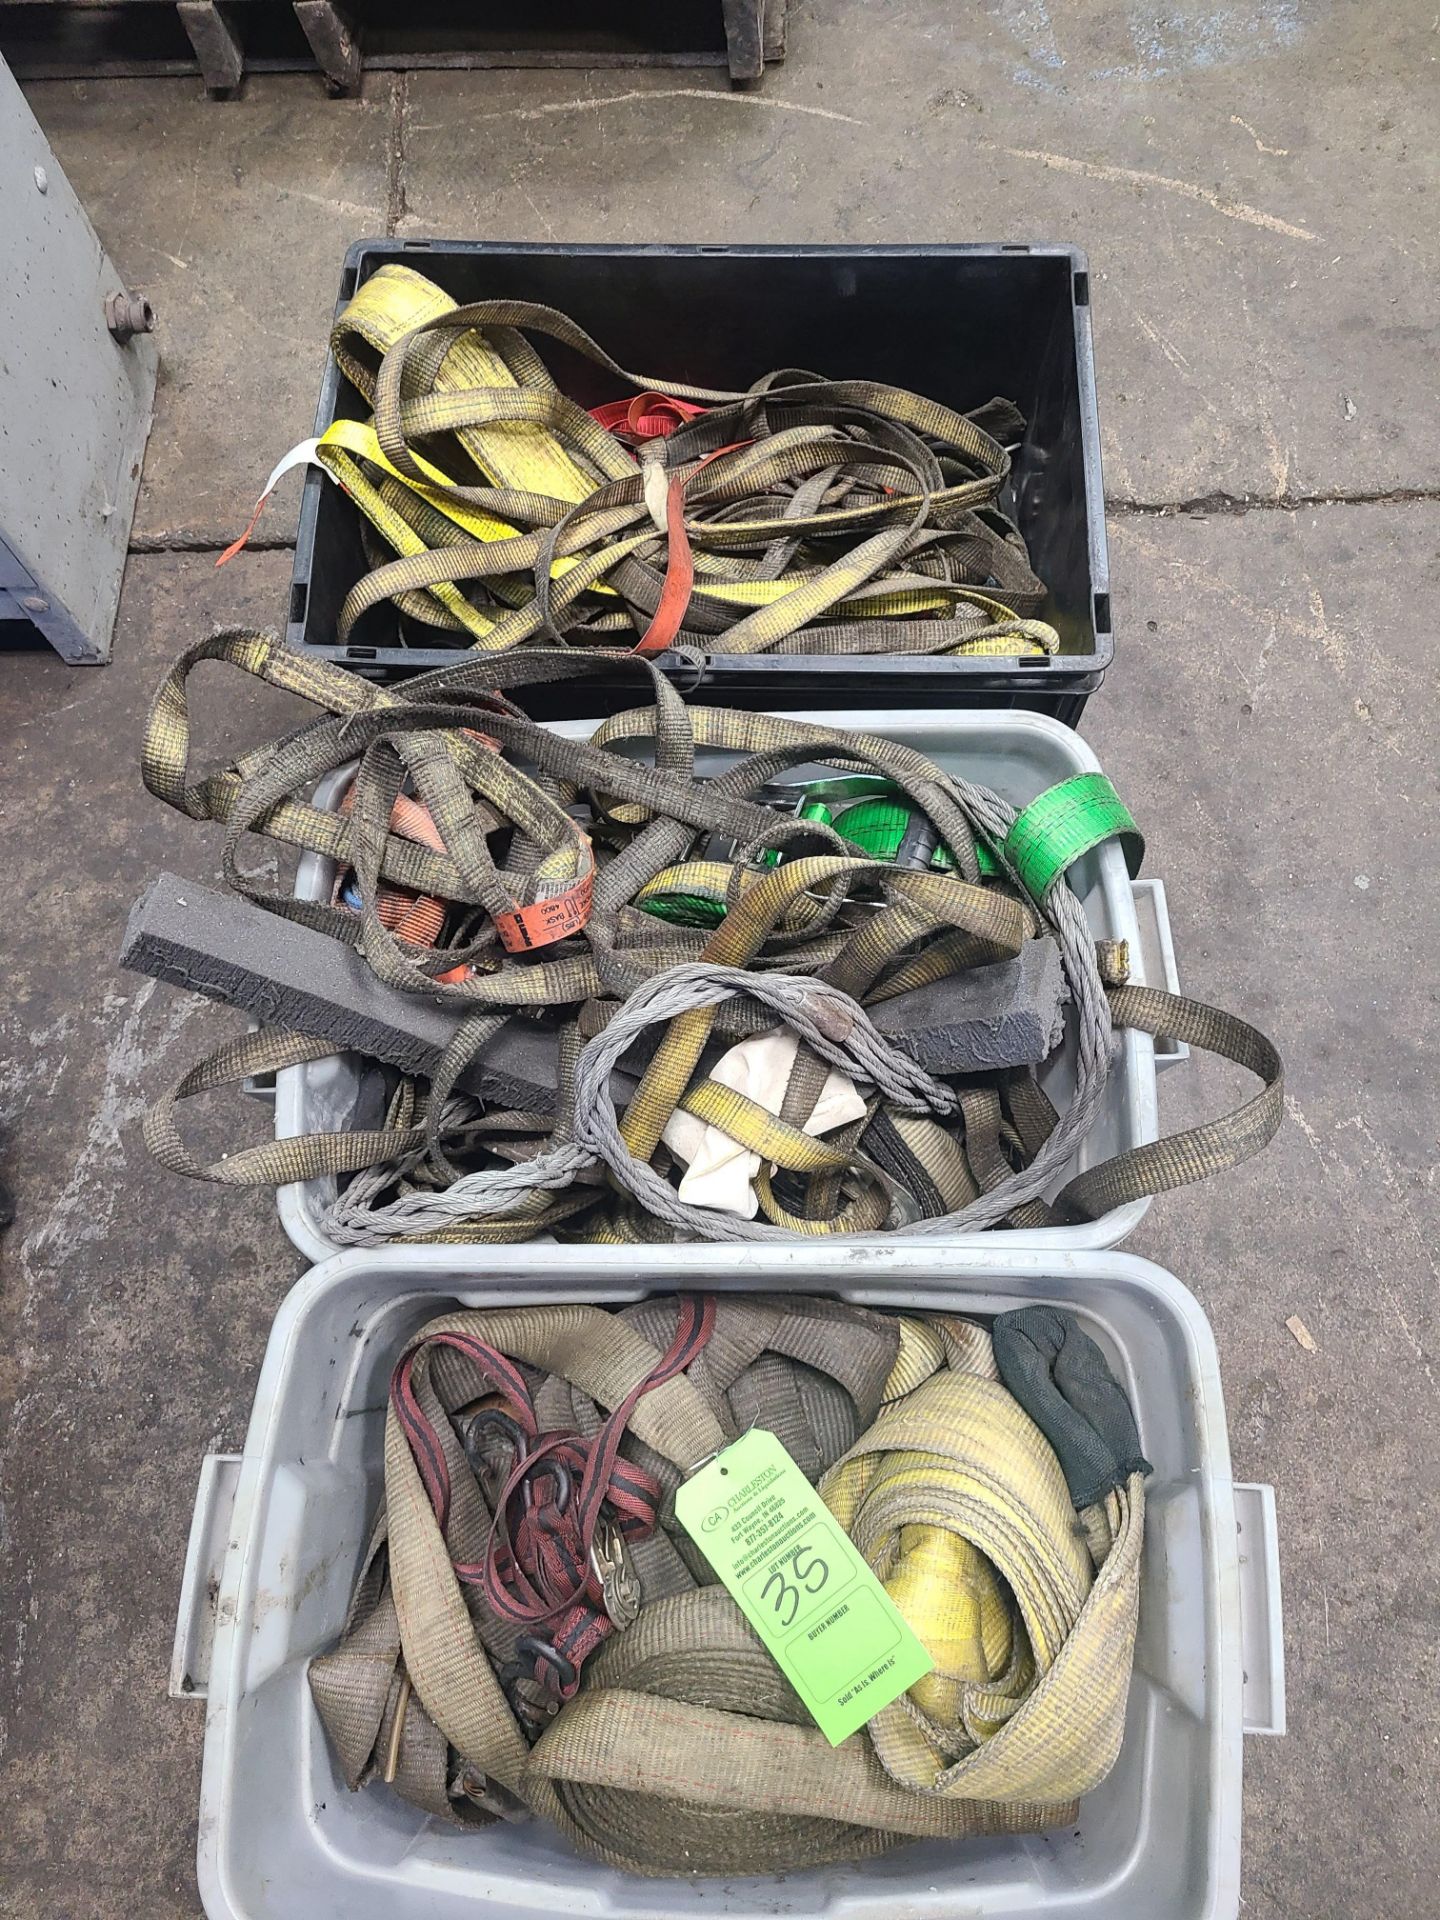 (3) TUBS OF RIGGING STRAPS AND TRUCK SCRAPS